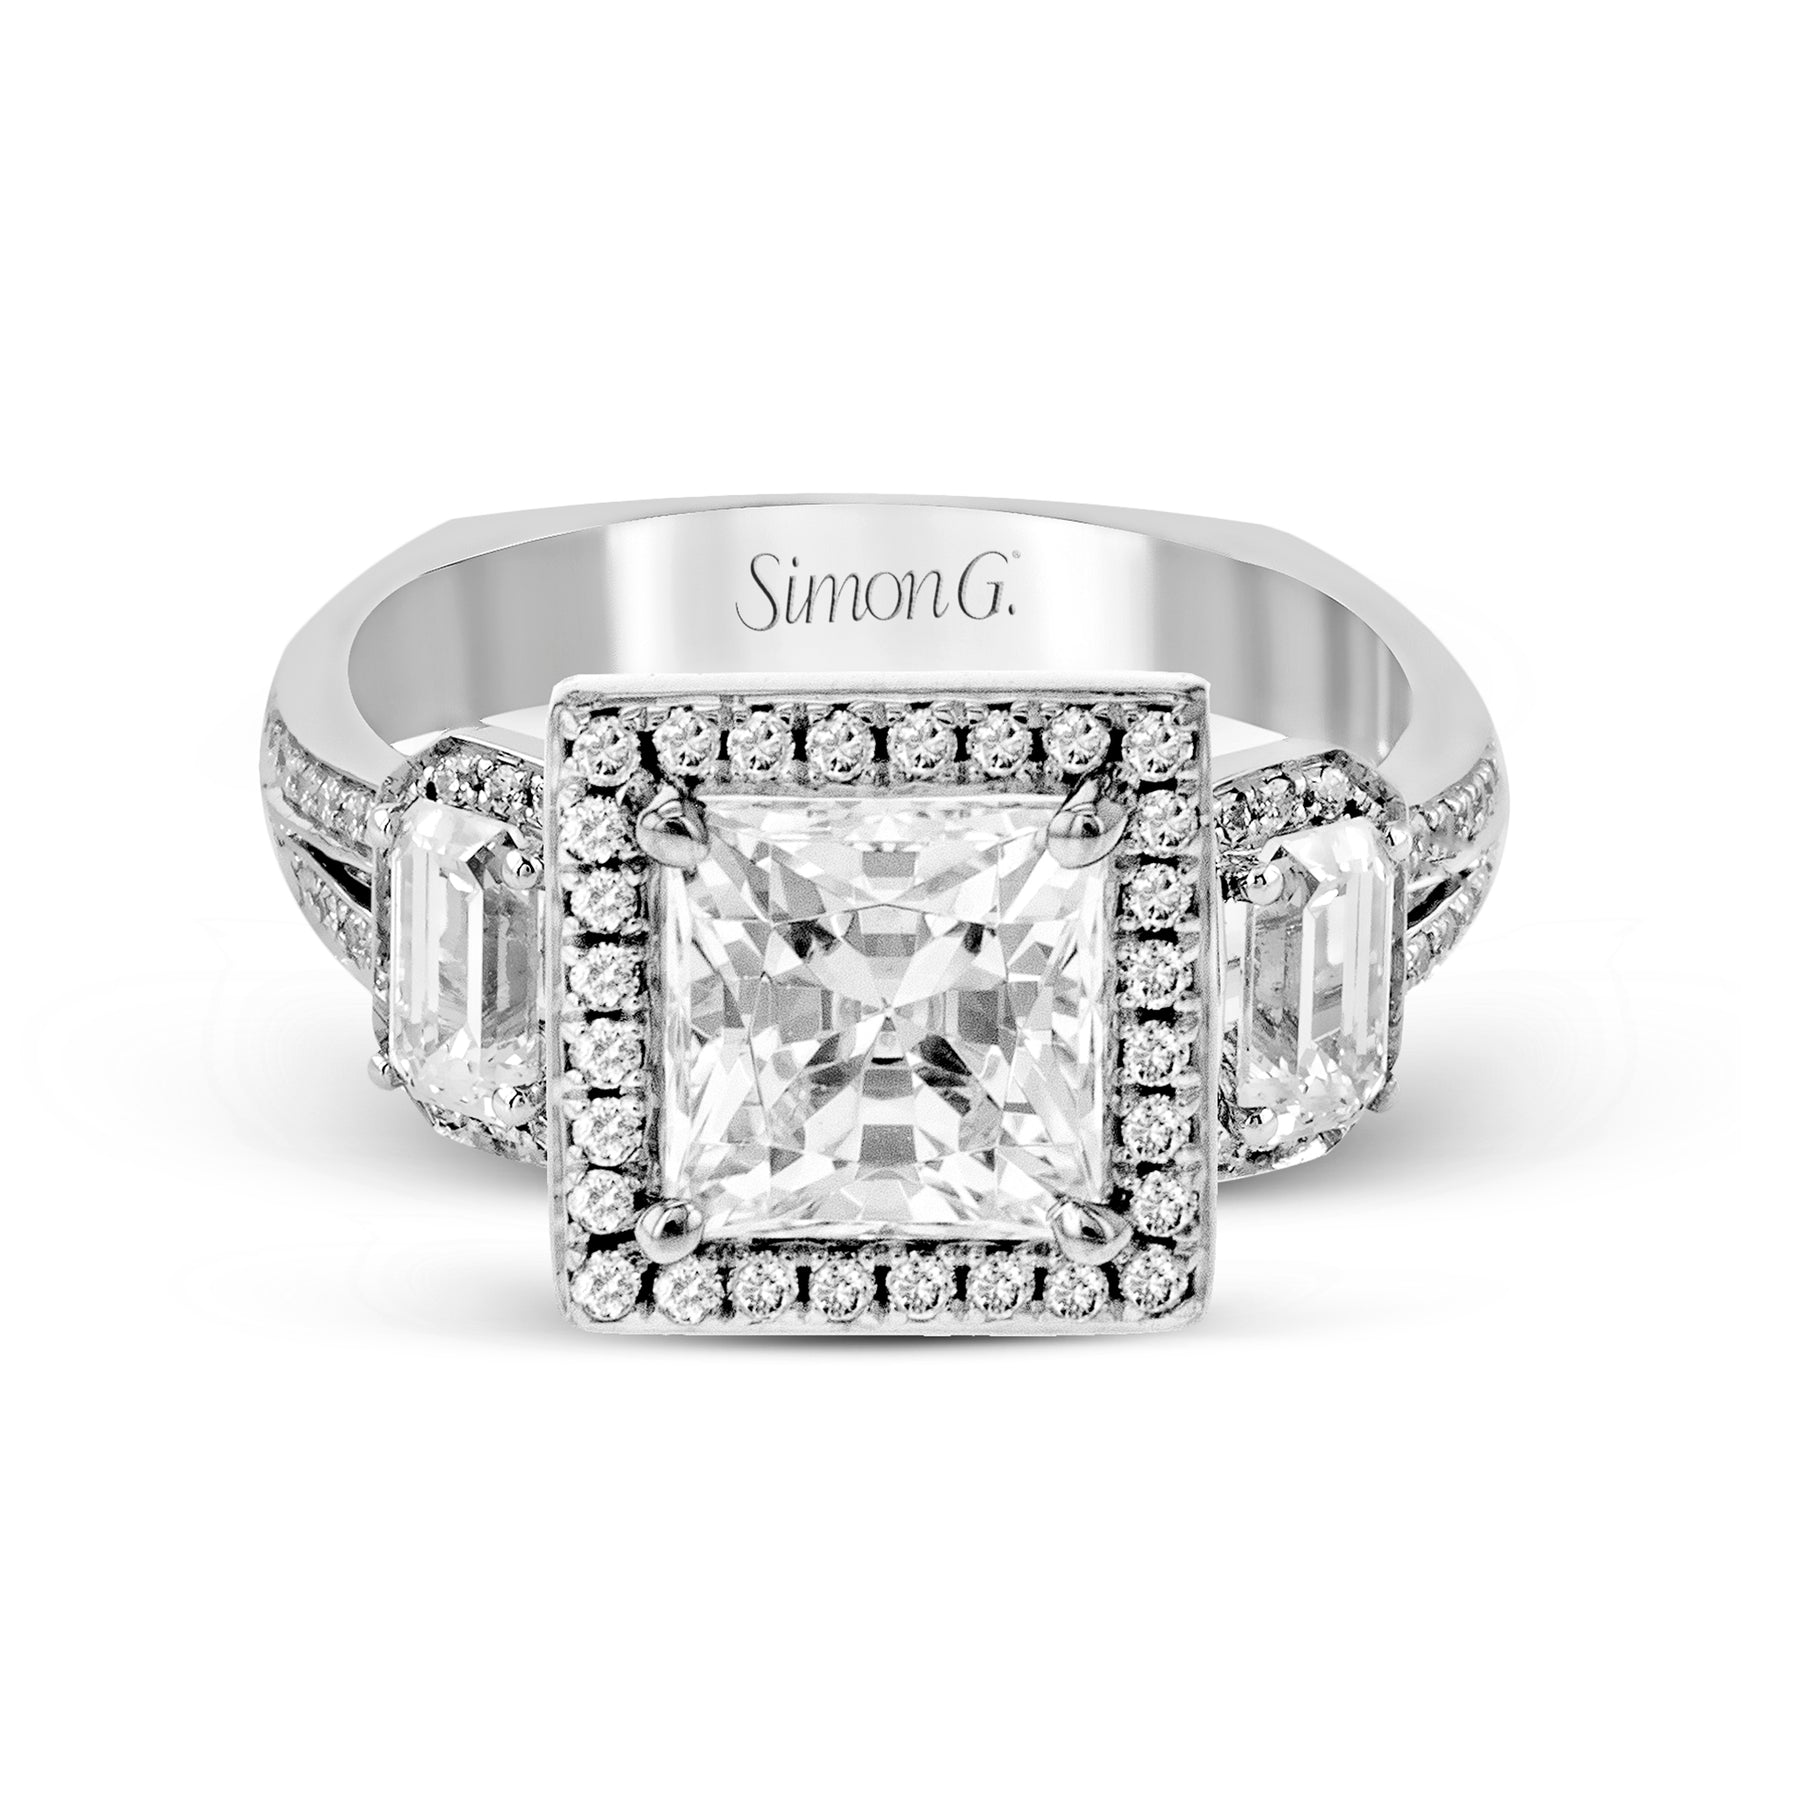 Princess-Cut Three-Stone Halo Engagement Ring In 18k Gold With Diamonds TR446-PC